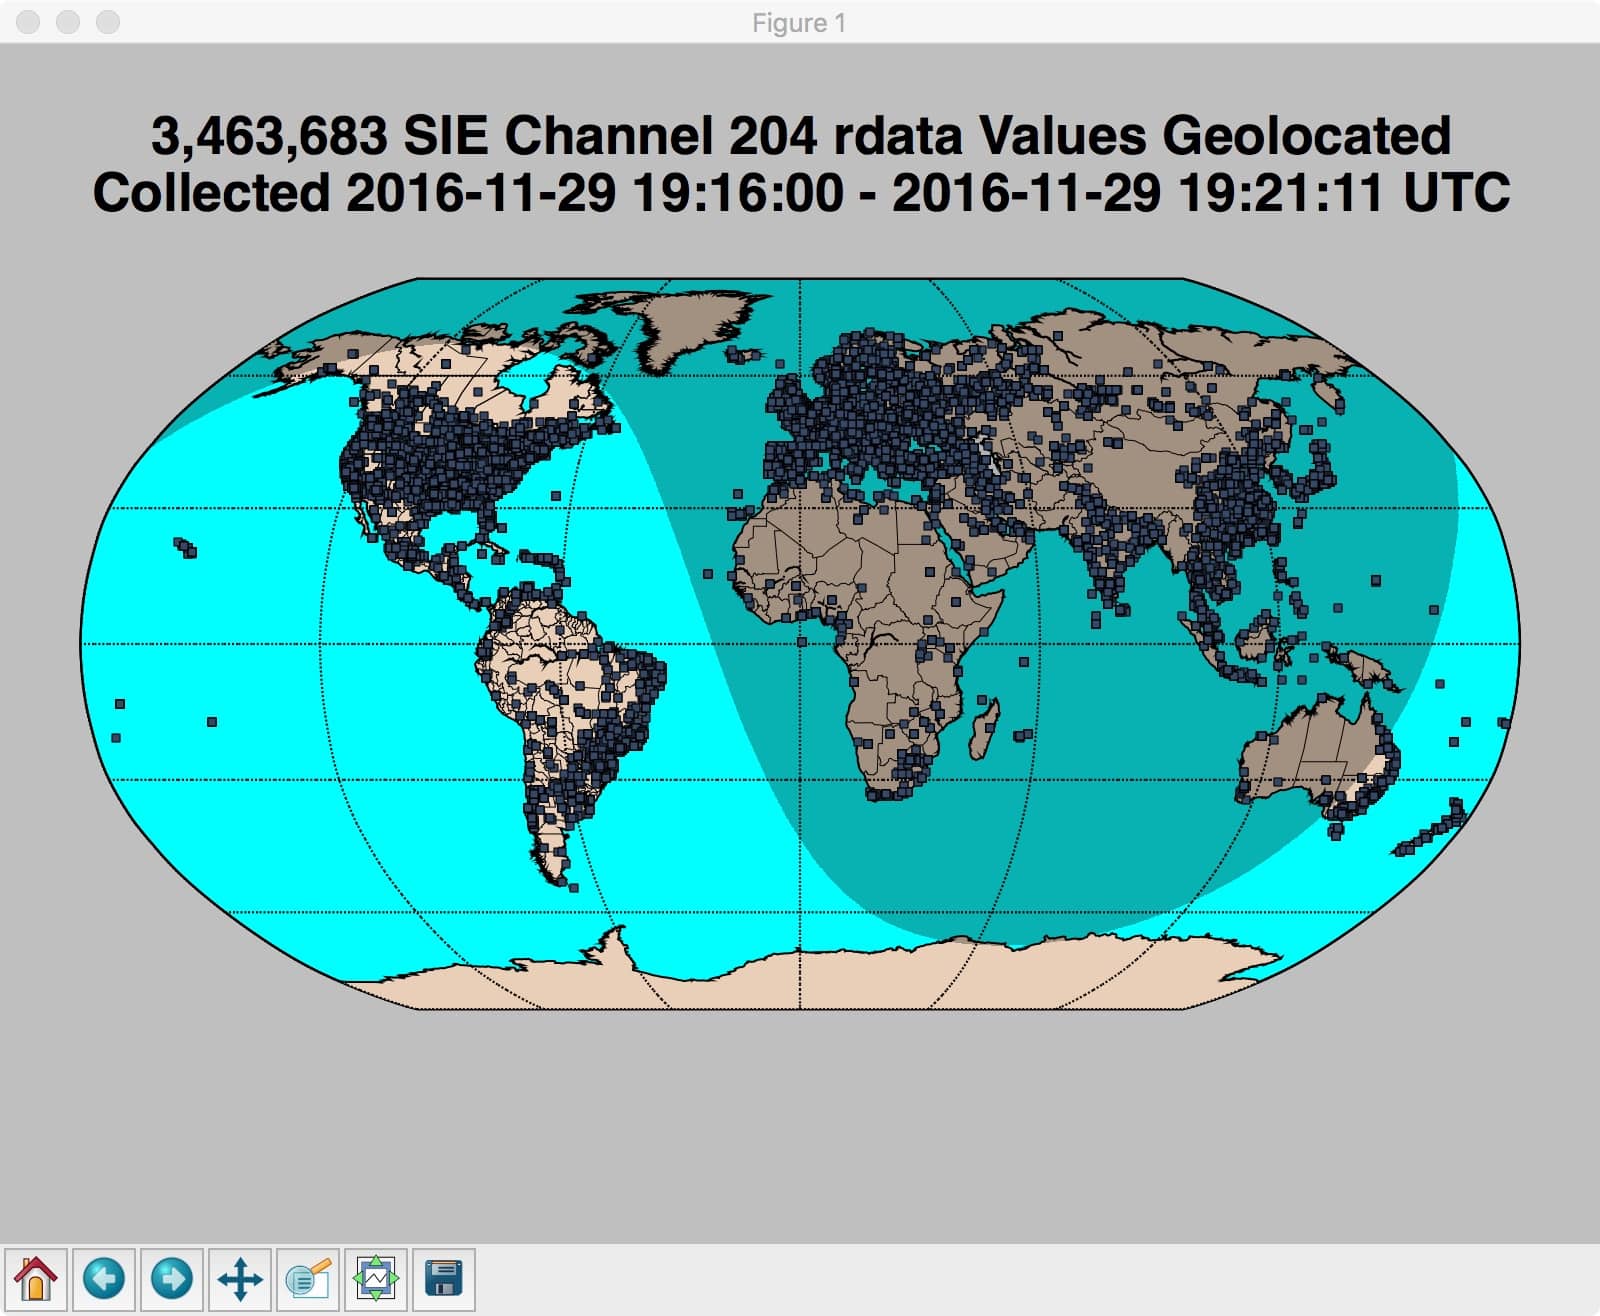 3,463,683 SIE Channel 204 rdata Values Geolocated